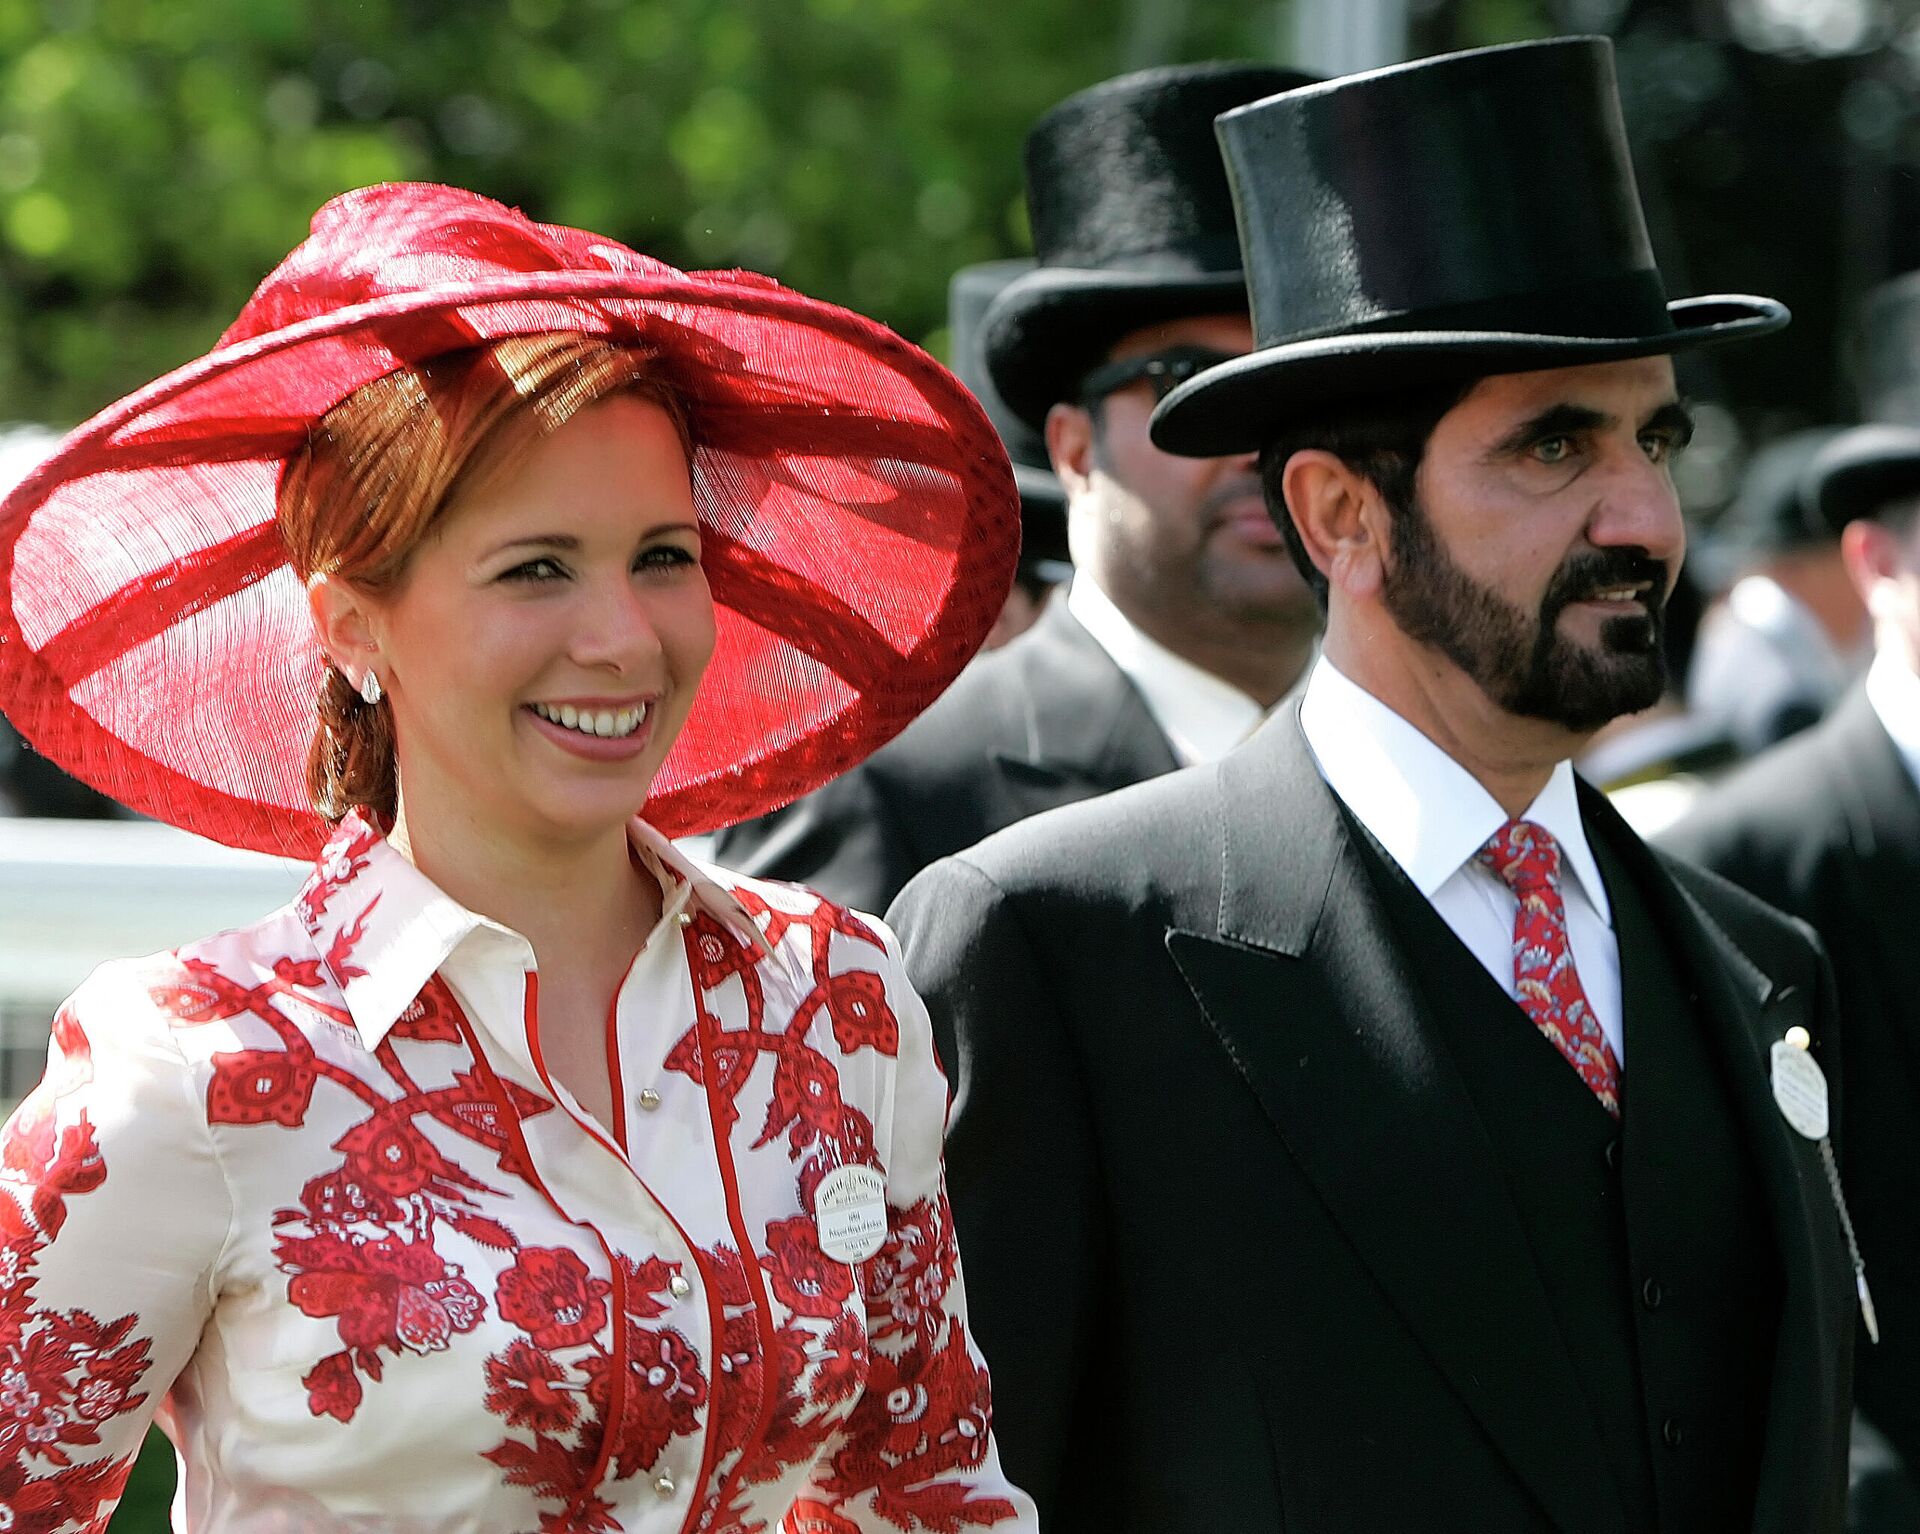 In this file photo taken on June 19, 2008 Dubai's Sheikh Mohammed bin Rashid Al Maktoum and his wife Princess Haya bint Al Hussein are pictured at Ascot racecourse during 'Ladies Day' at Royal Ascot, in southern England. - Sputnik International, 1920, 09.10.2021